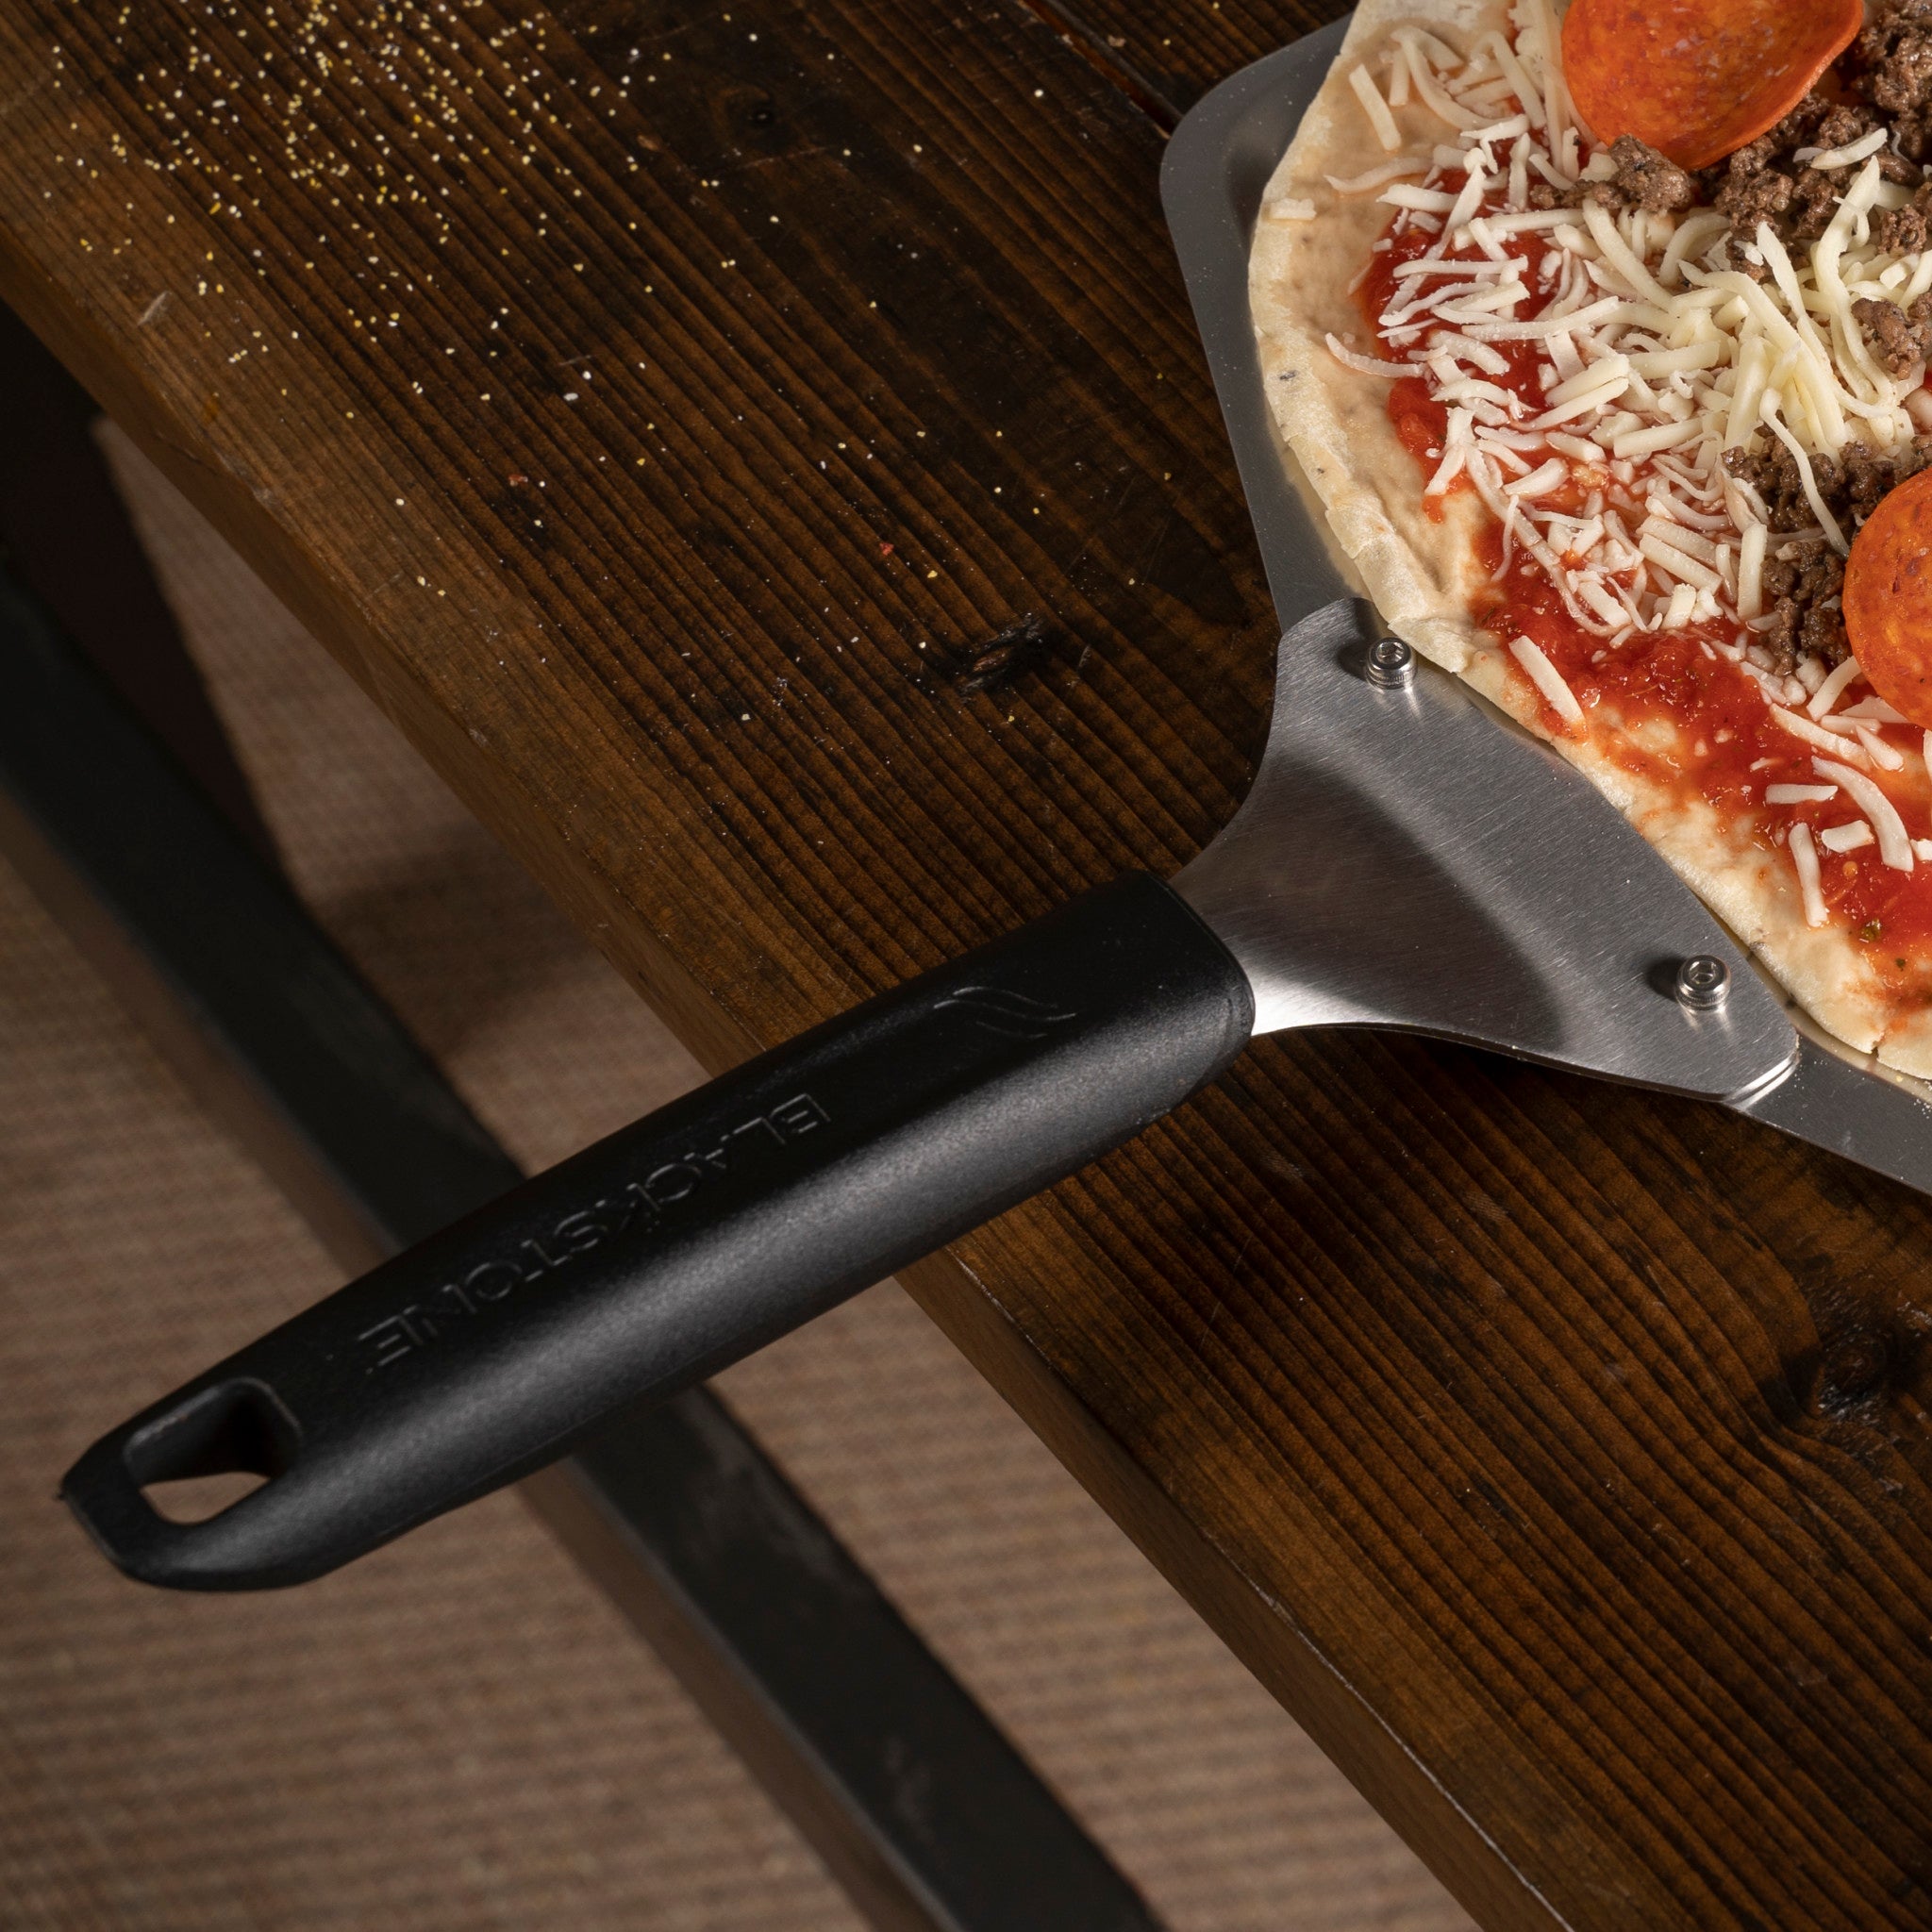 Camp Chef Pizza Accessories Kit - Includes 2 Pizza Peel, 1 Pizza Spatula &  1 Rocking Pizza Cutter - Premium Pizza Kit for Indoor or Outdoor Cooking